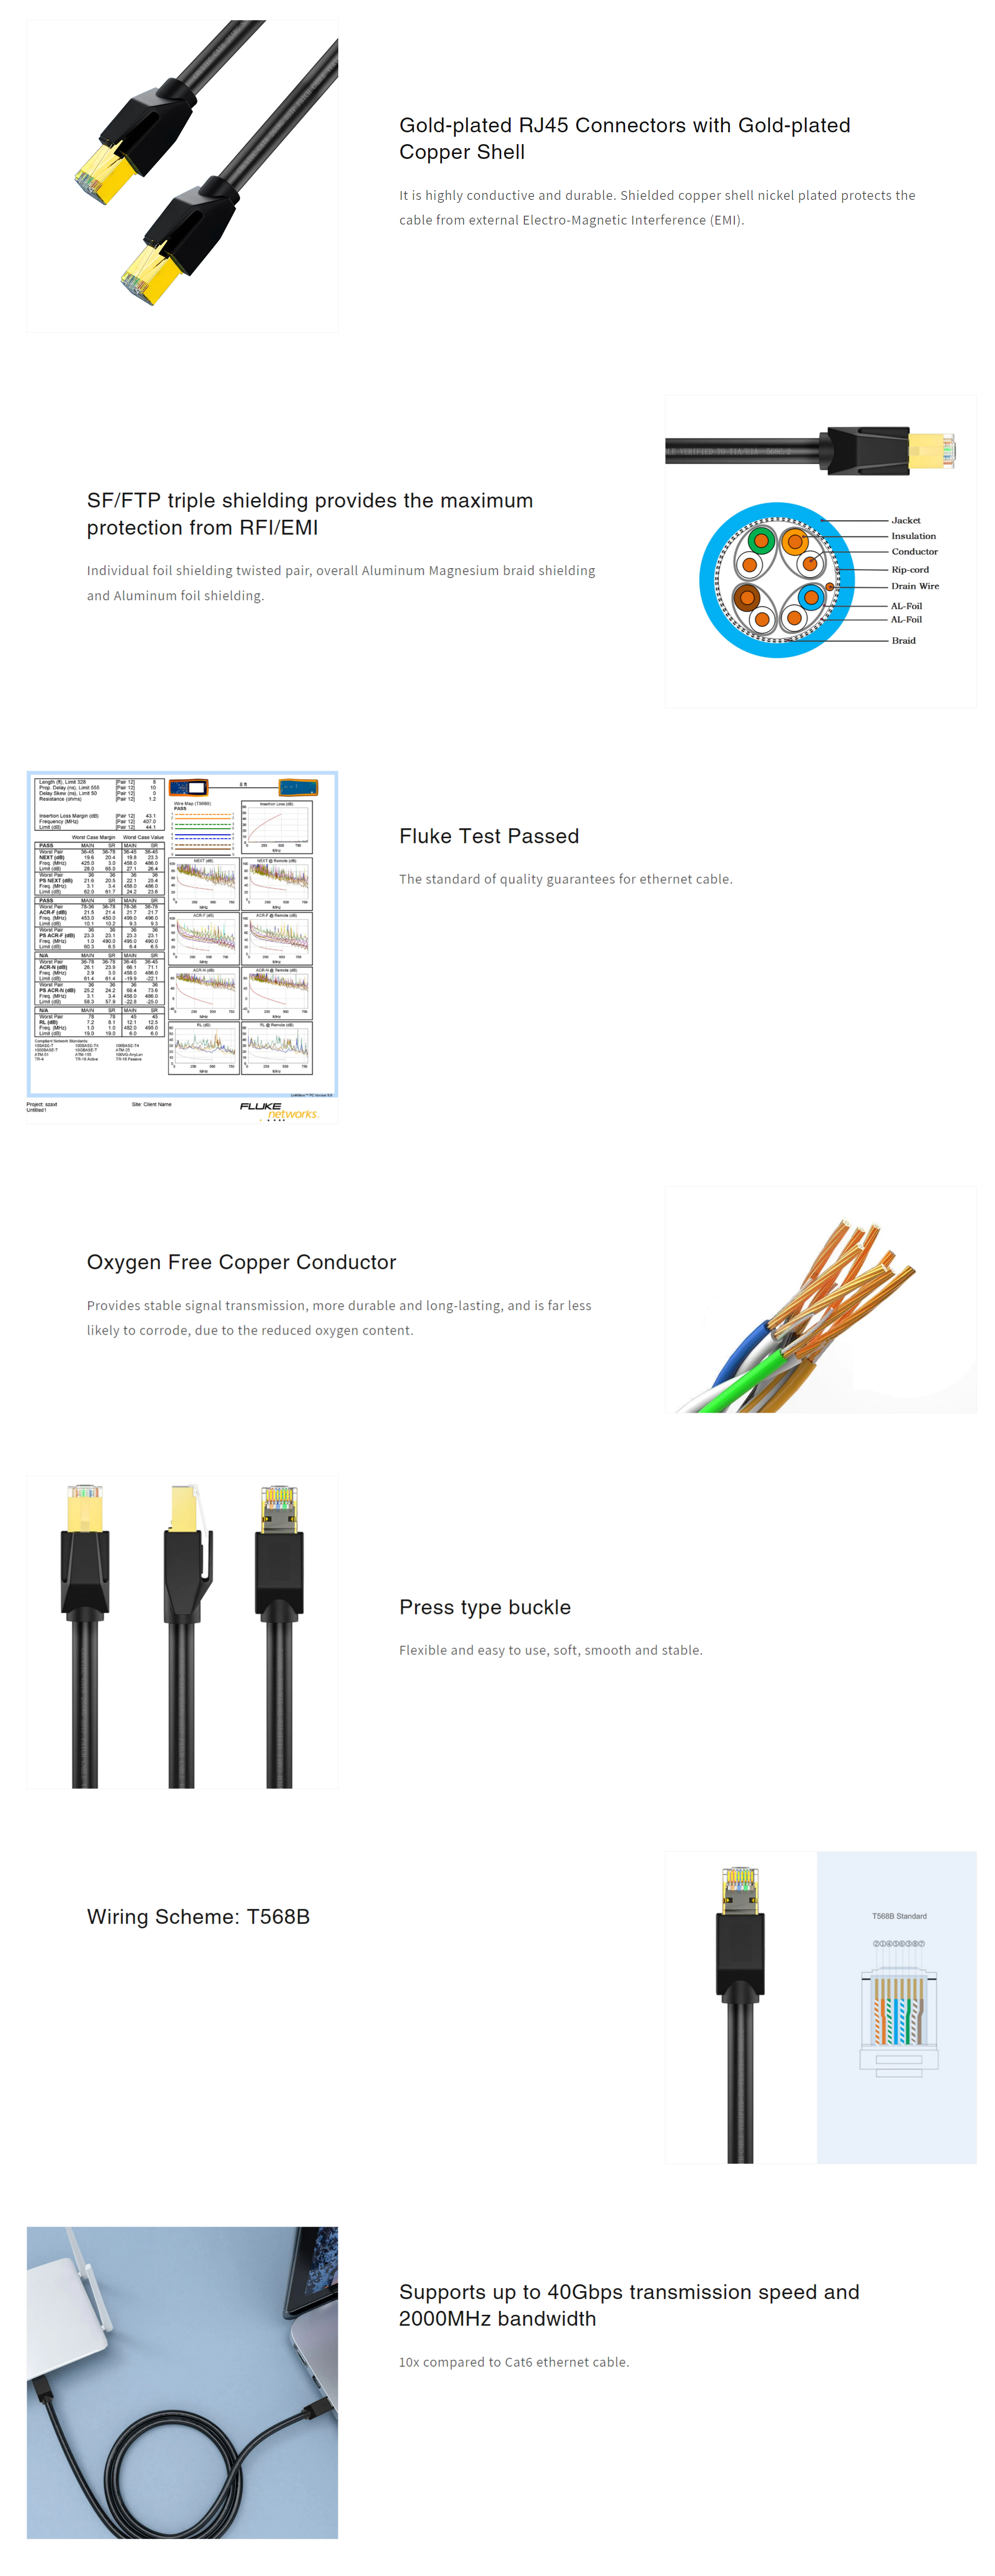 A large marketing image providing additional information about the product Cruxtec CAT8 0.5m 40GbE SF/FTP Triple Shielding Ethernet Cable Black - Additional alt info not provided